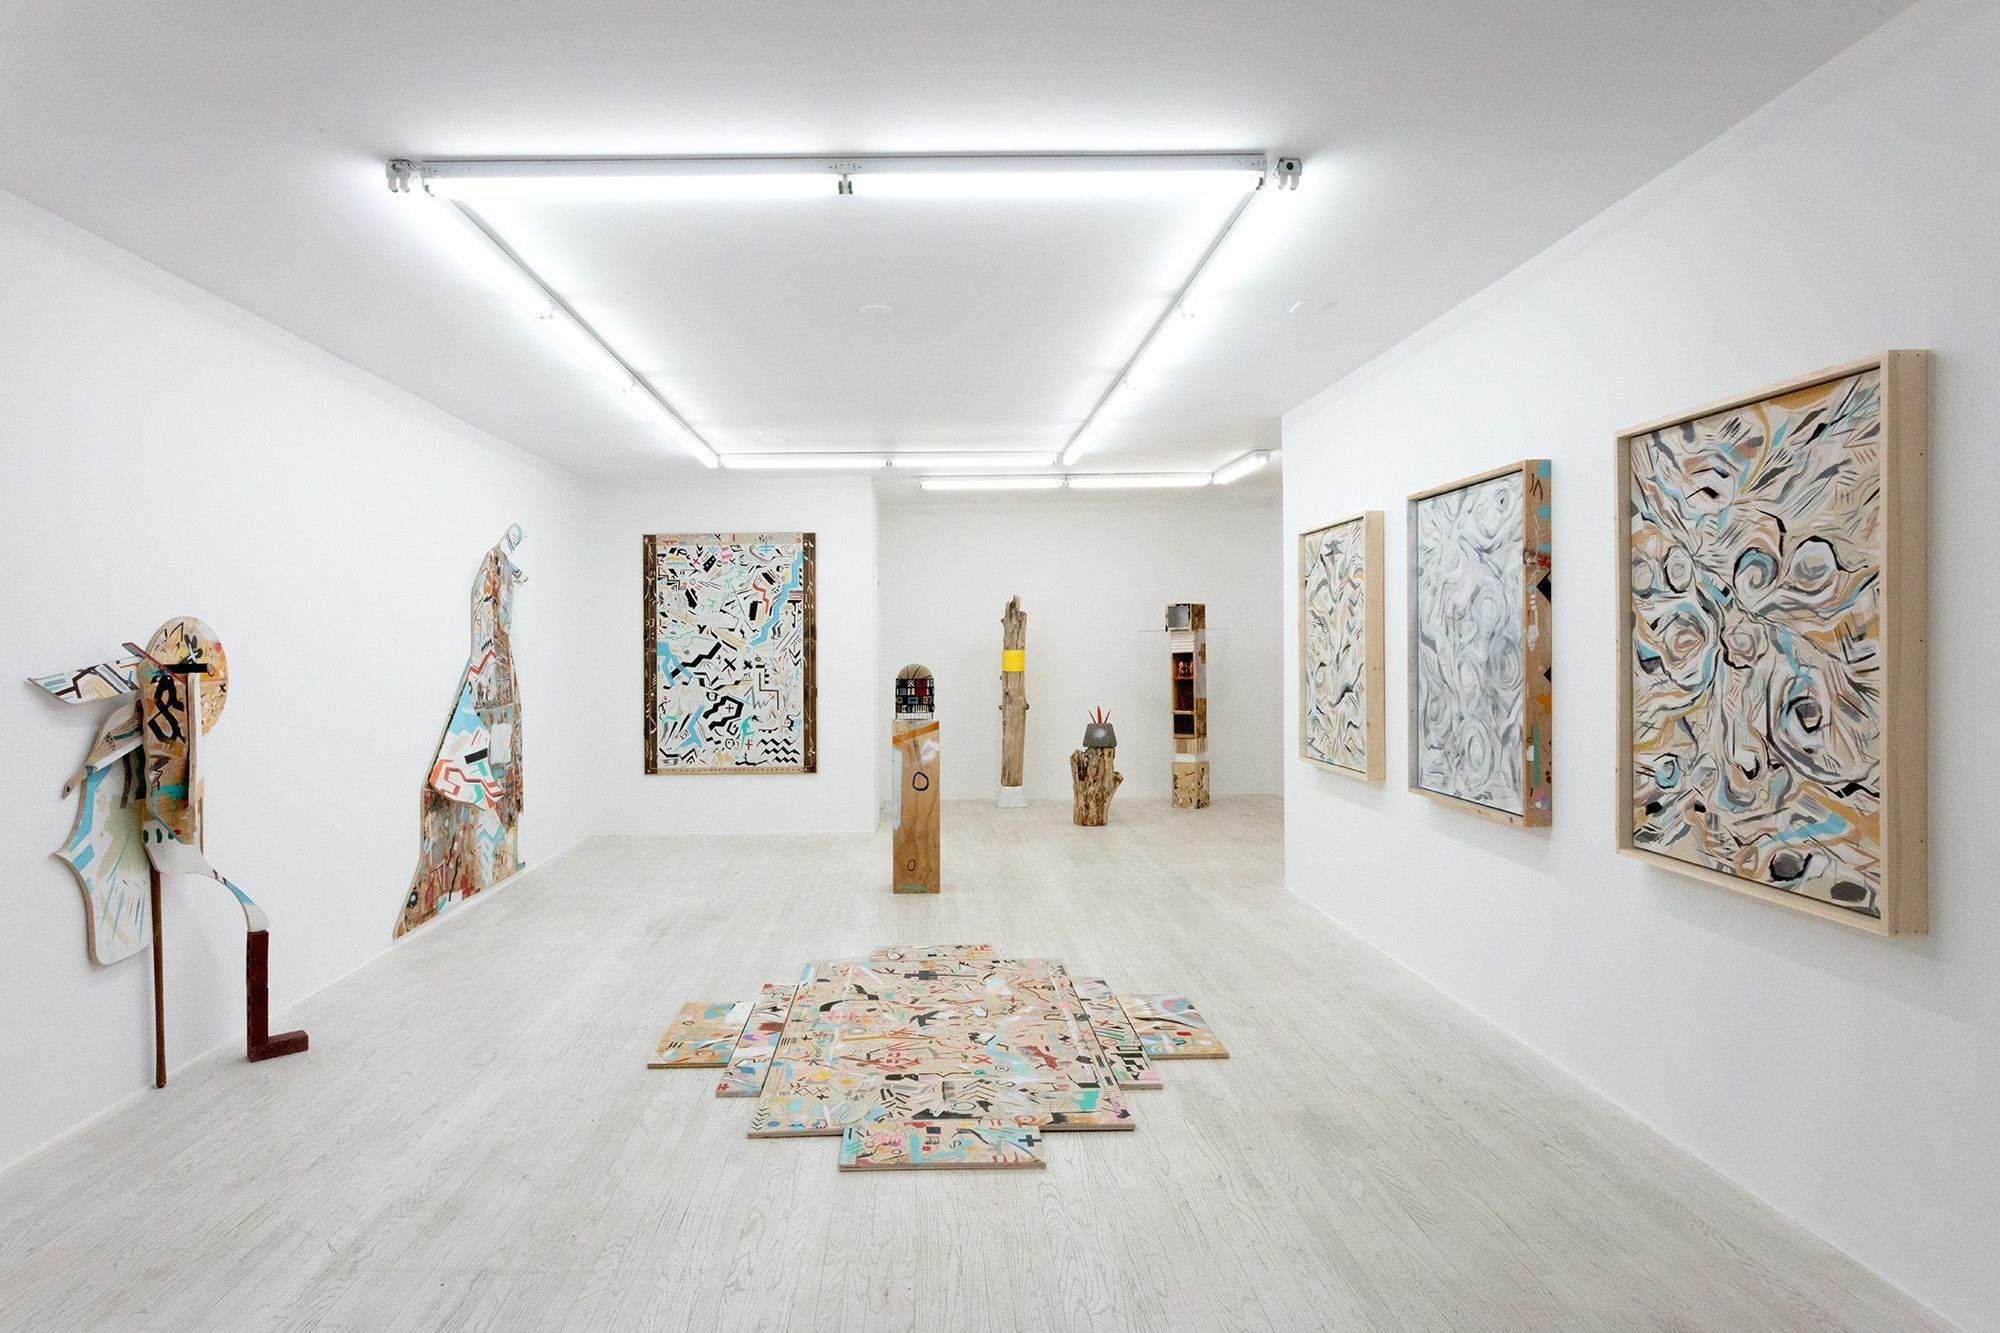 Installation view of “White Snake,” Matthew Kirk’s second solo exhibition at Halsey McKay Gallery. COURTESY HALSEY MCKAY GALLERY